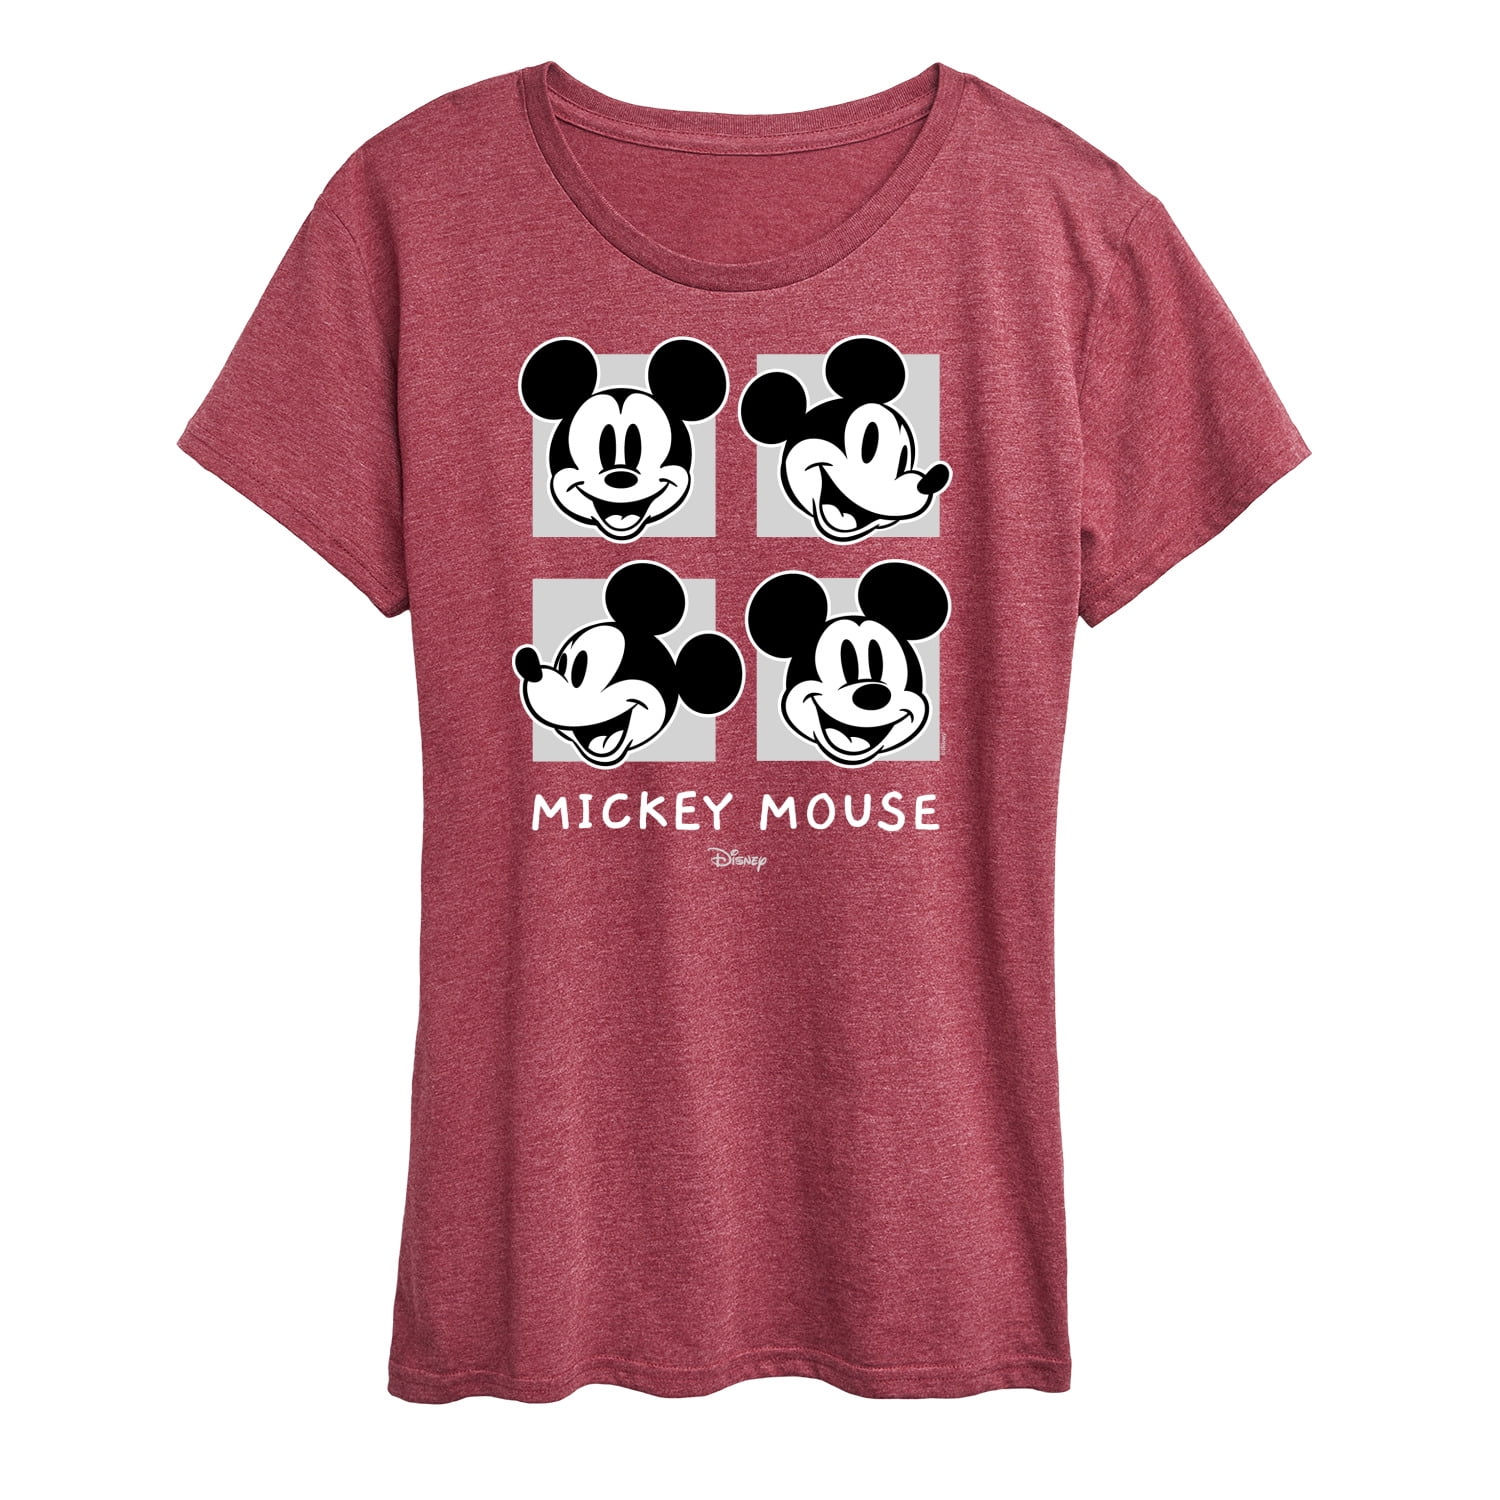 Disney - Mickey & Friends - Mickey Mouse - Black & White Photo Grid -  Women's Short Sleeve Graphic T-Shirt